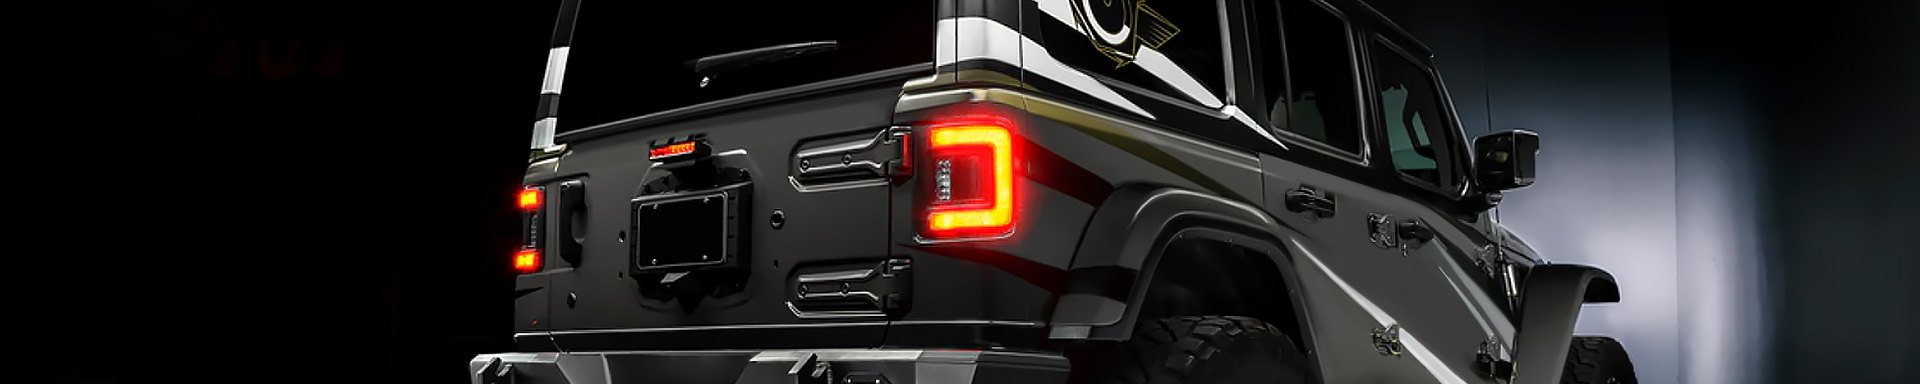 Upgrade Your Wrangler JL with New Flush Mount LED Tail Lights by Oracle